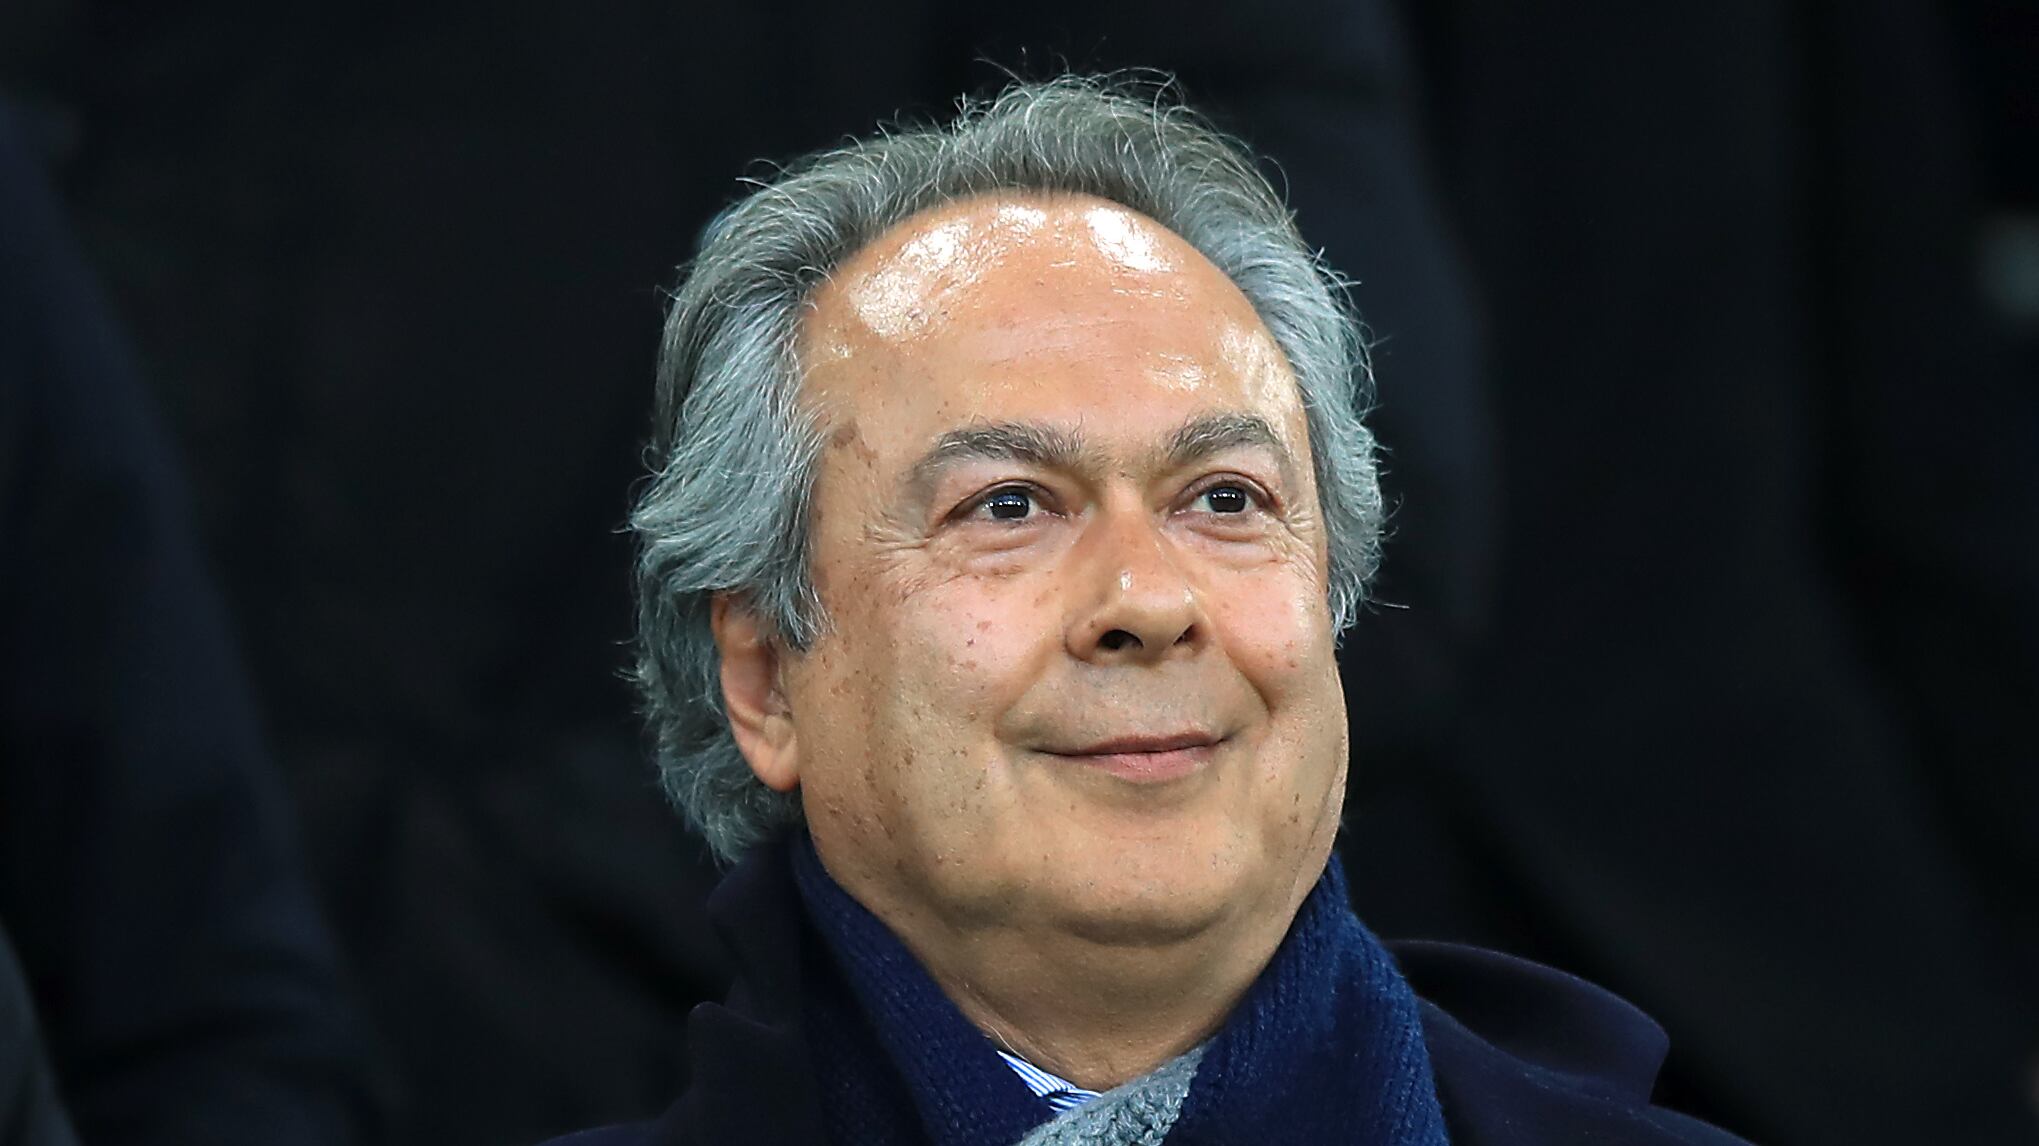 Everton owner Farhad Moshiri has entered exclusive discussions with the Friedkin Group over the purchase of his majority stake in the club